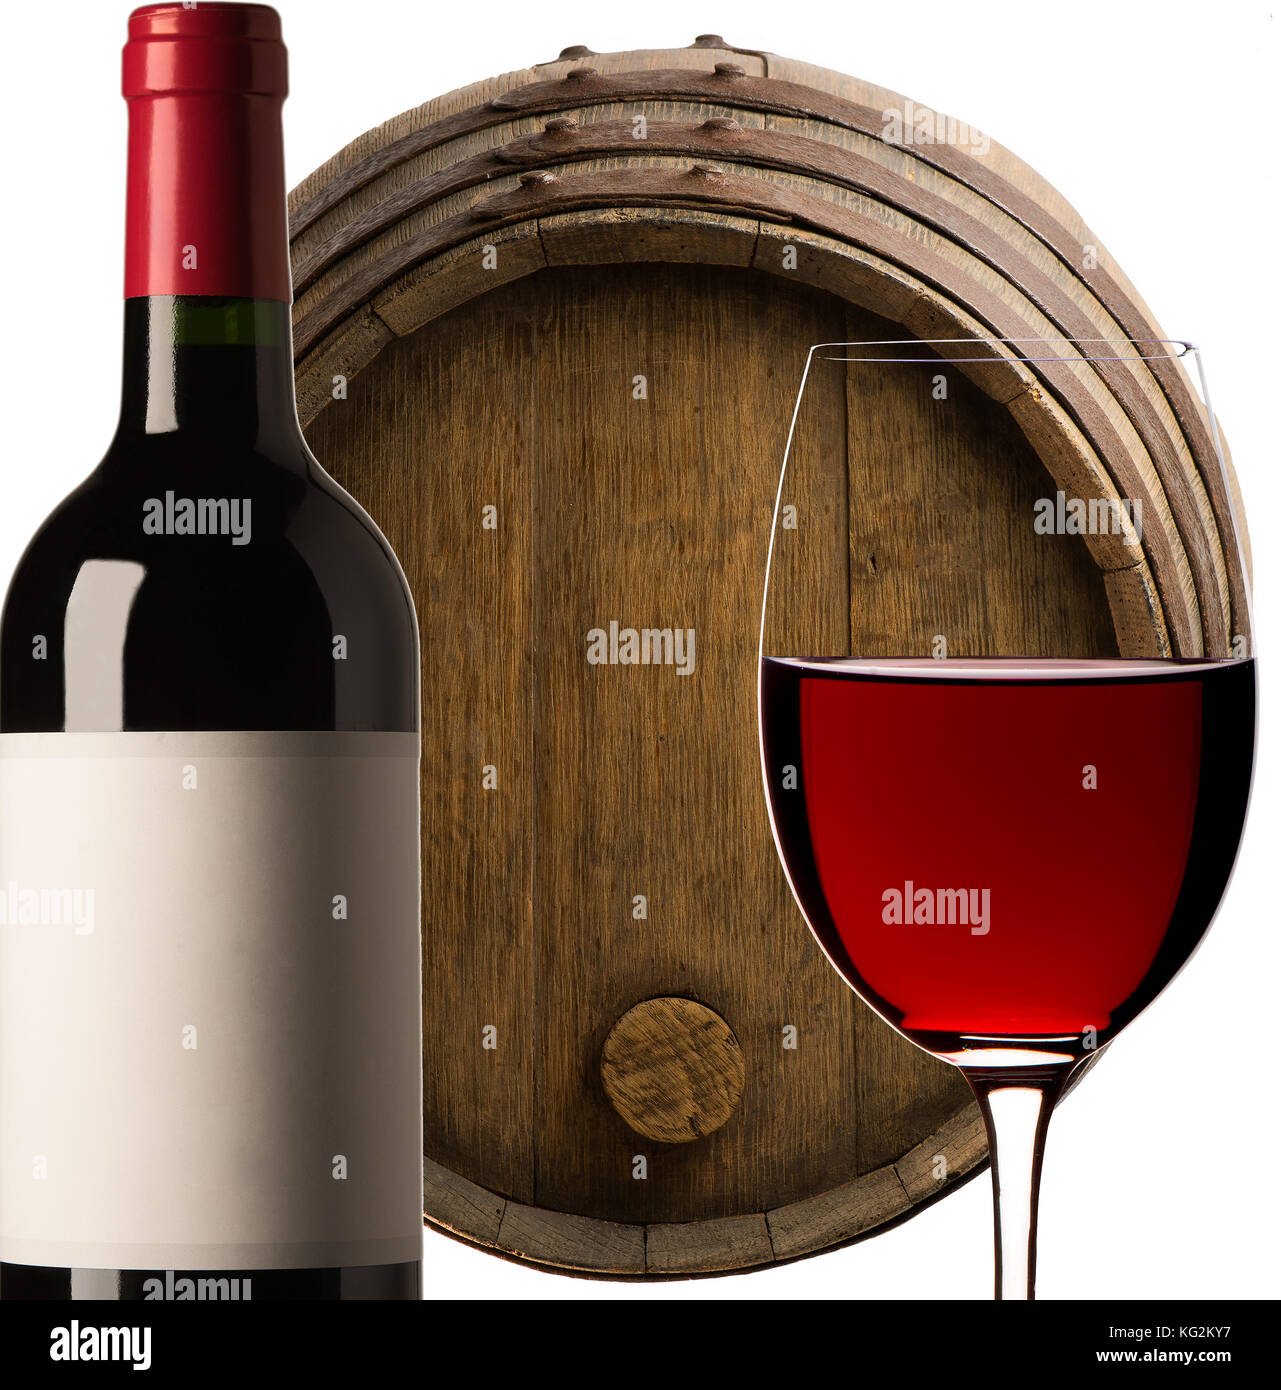 Barrel Wine, Bottle of Wine, Glass of red wine on a white background, France Stock Photo